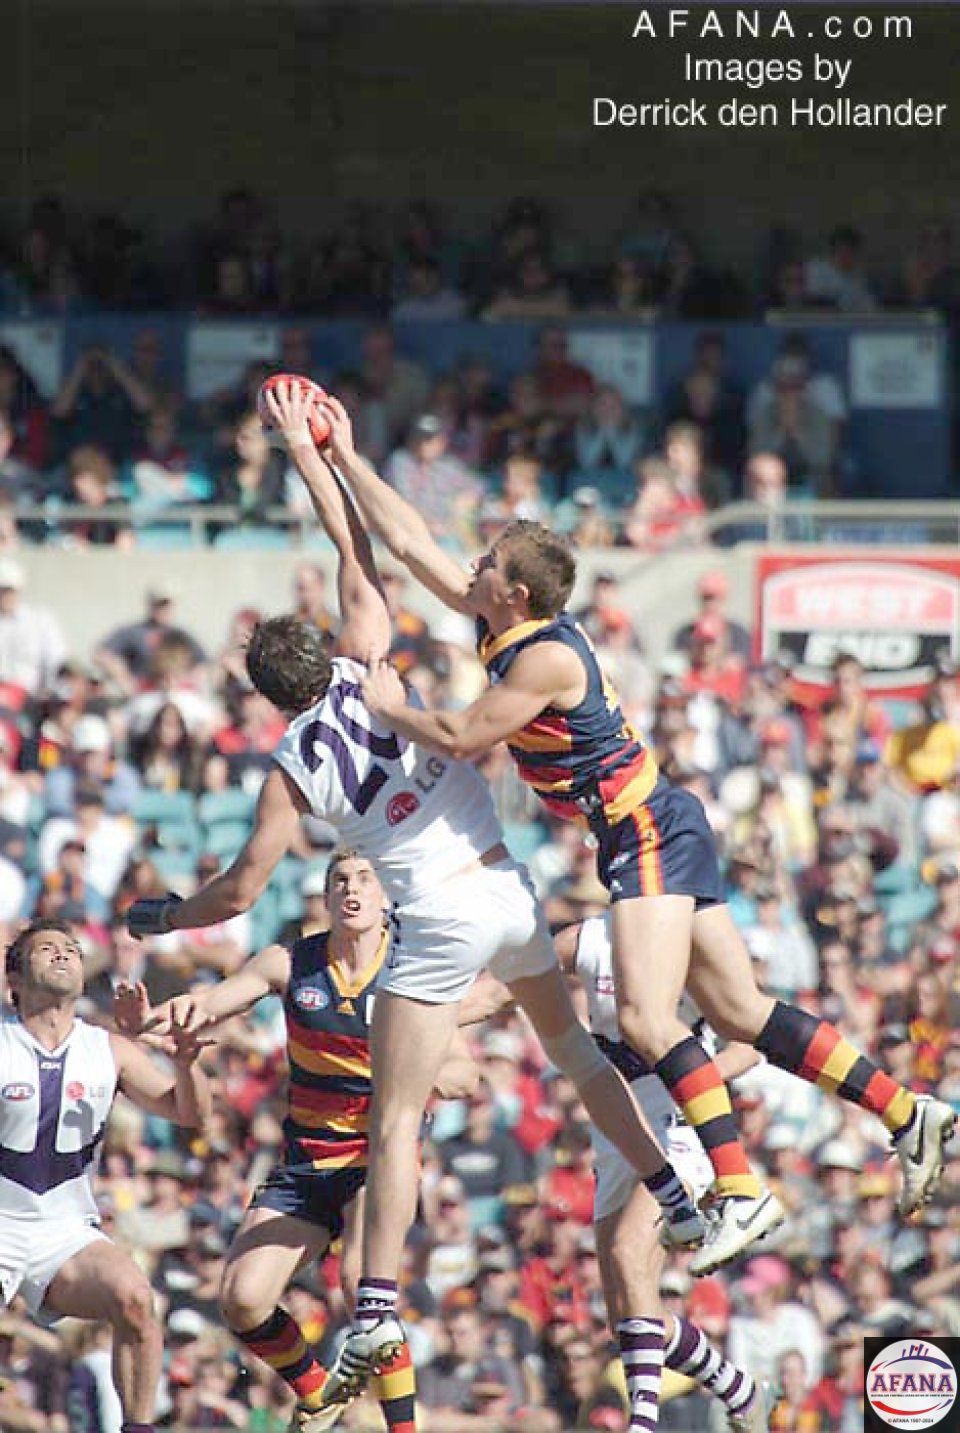 [b]The football is fiercely contested mid air in the Fremantle-v-Crows game[/b]